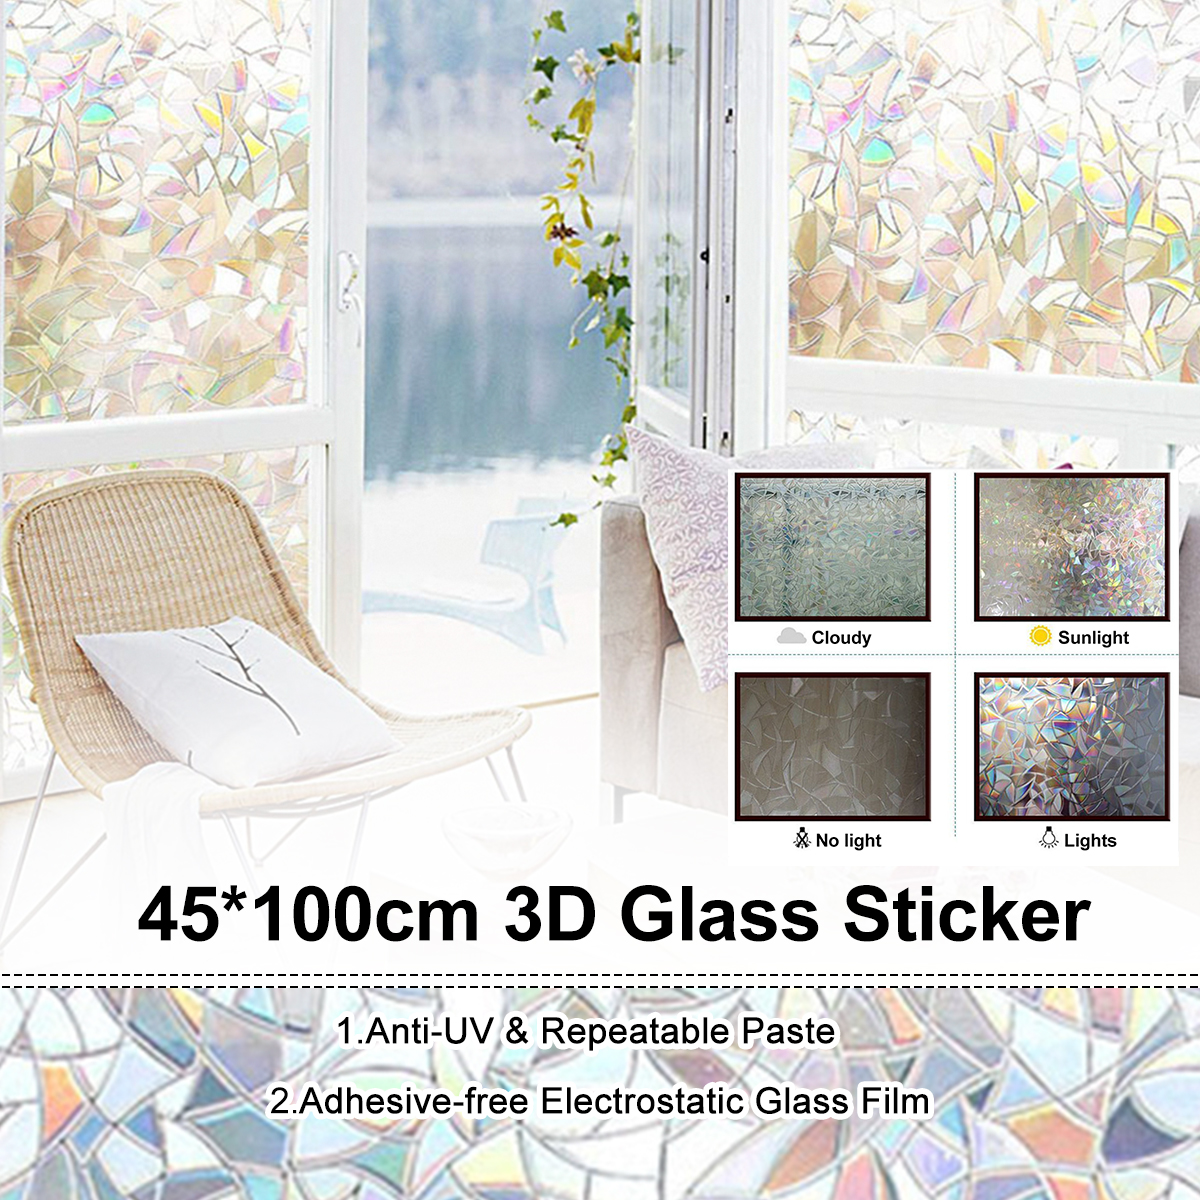 45100cm-3D-Glass-Sticker-Adhesive-free-Electrostatic-Glass-Film-Anti-UV-For-Home-Office-1719664-3